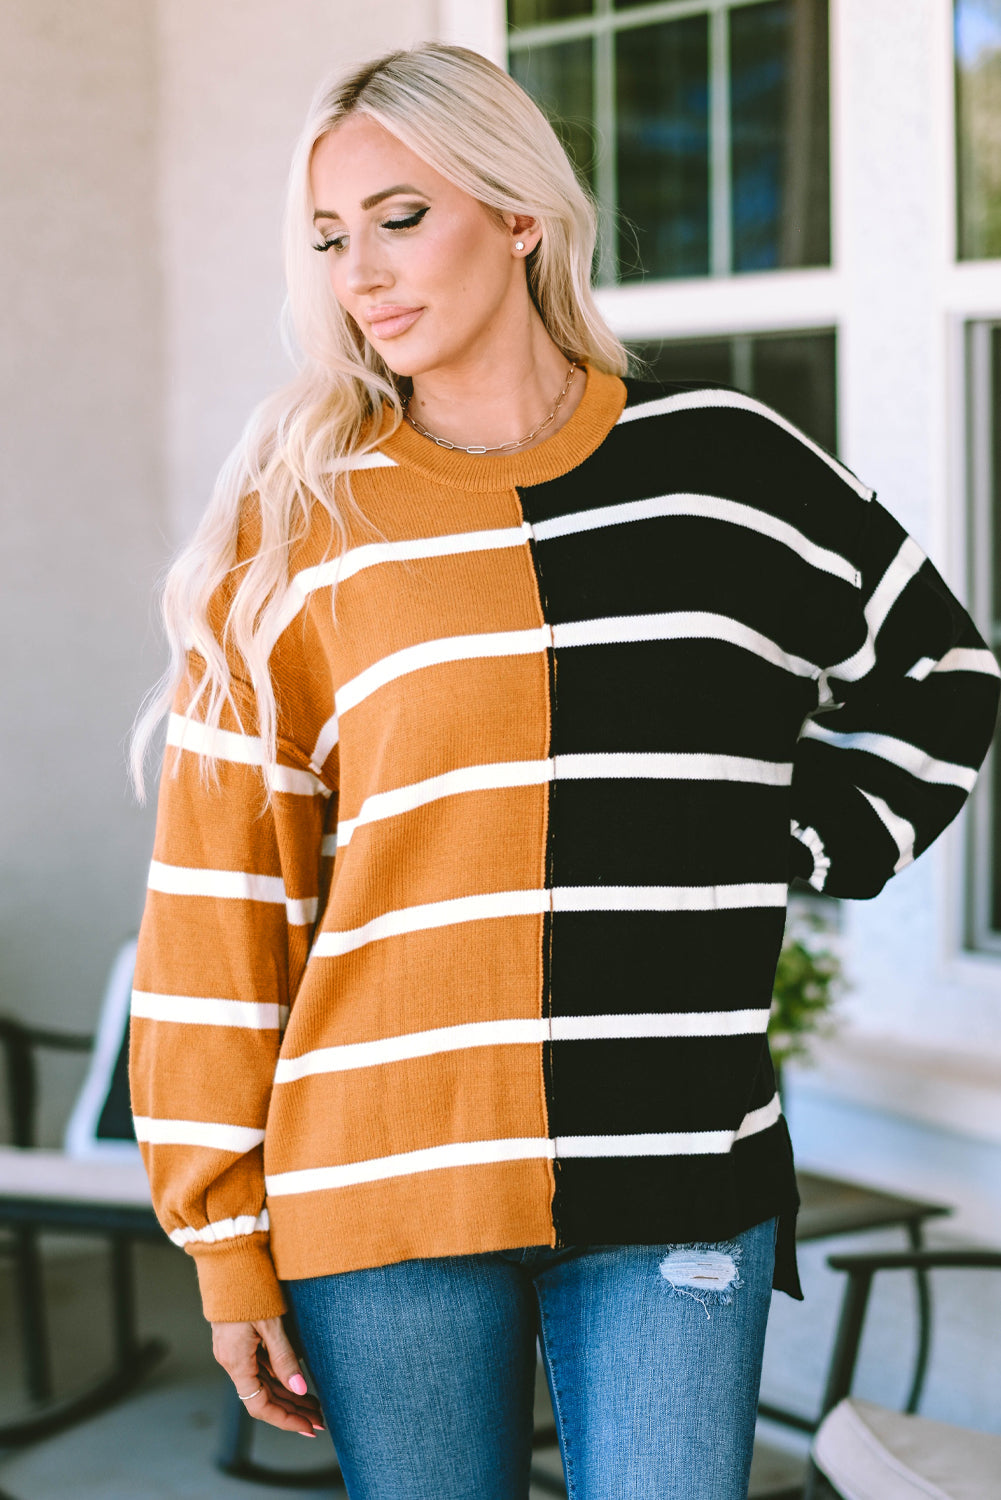 Stripe oversized contrast printed dropped shoulder top - s / 50% viscose + 28% polyester + 22% polyamide - long sleeve